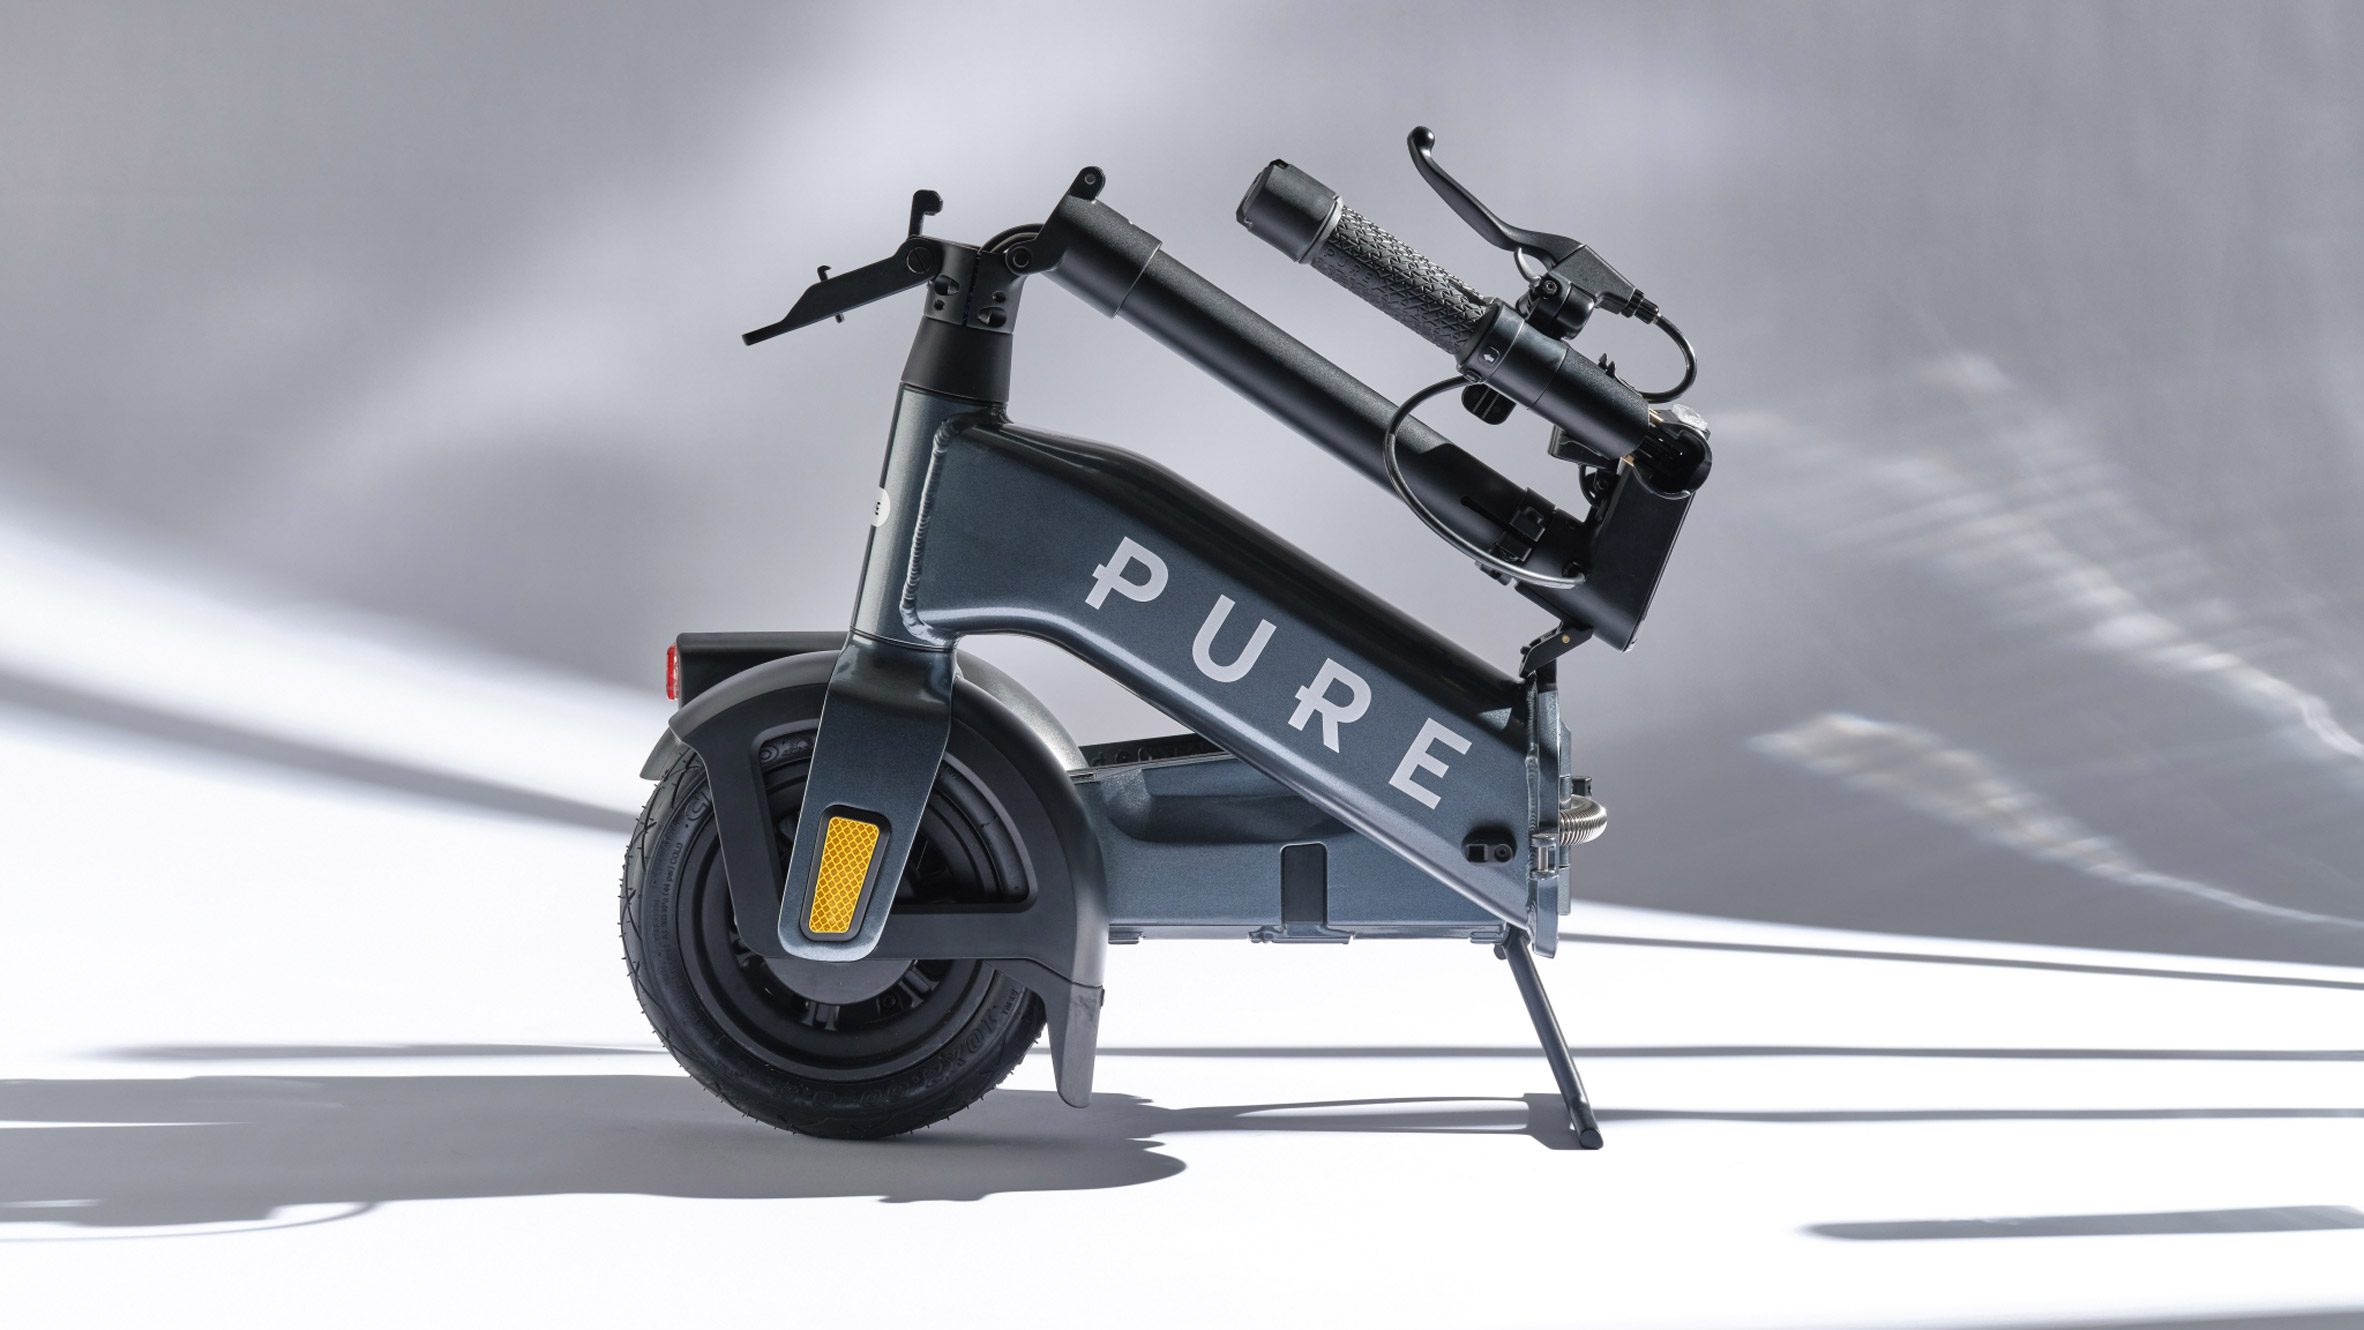 Pure Advance Flex foldable electric scooter by Pure Electric